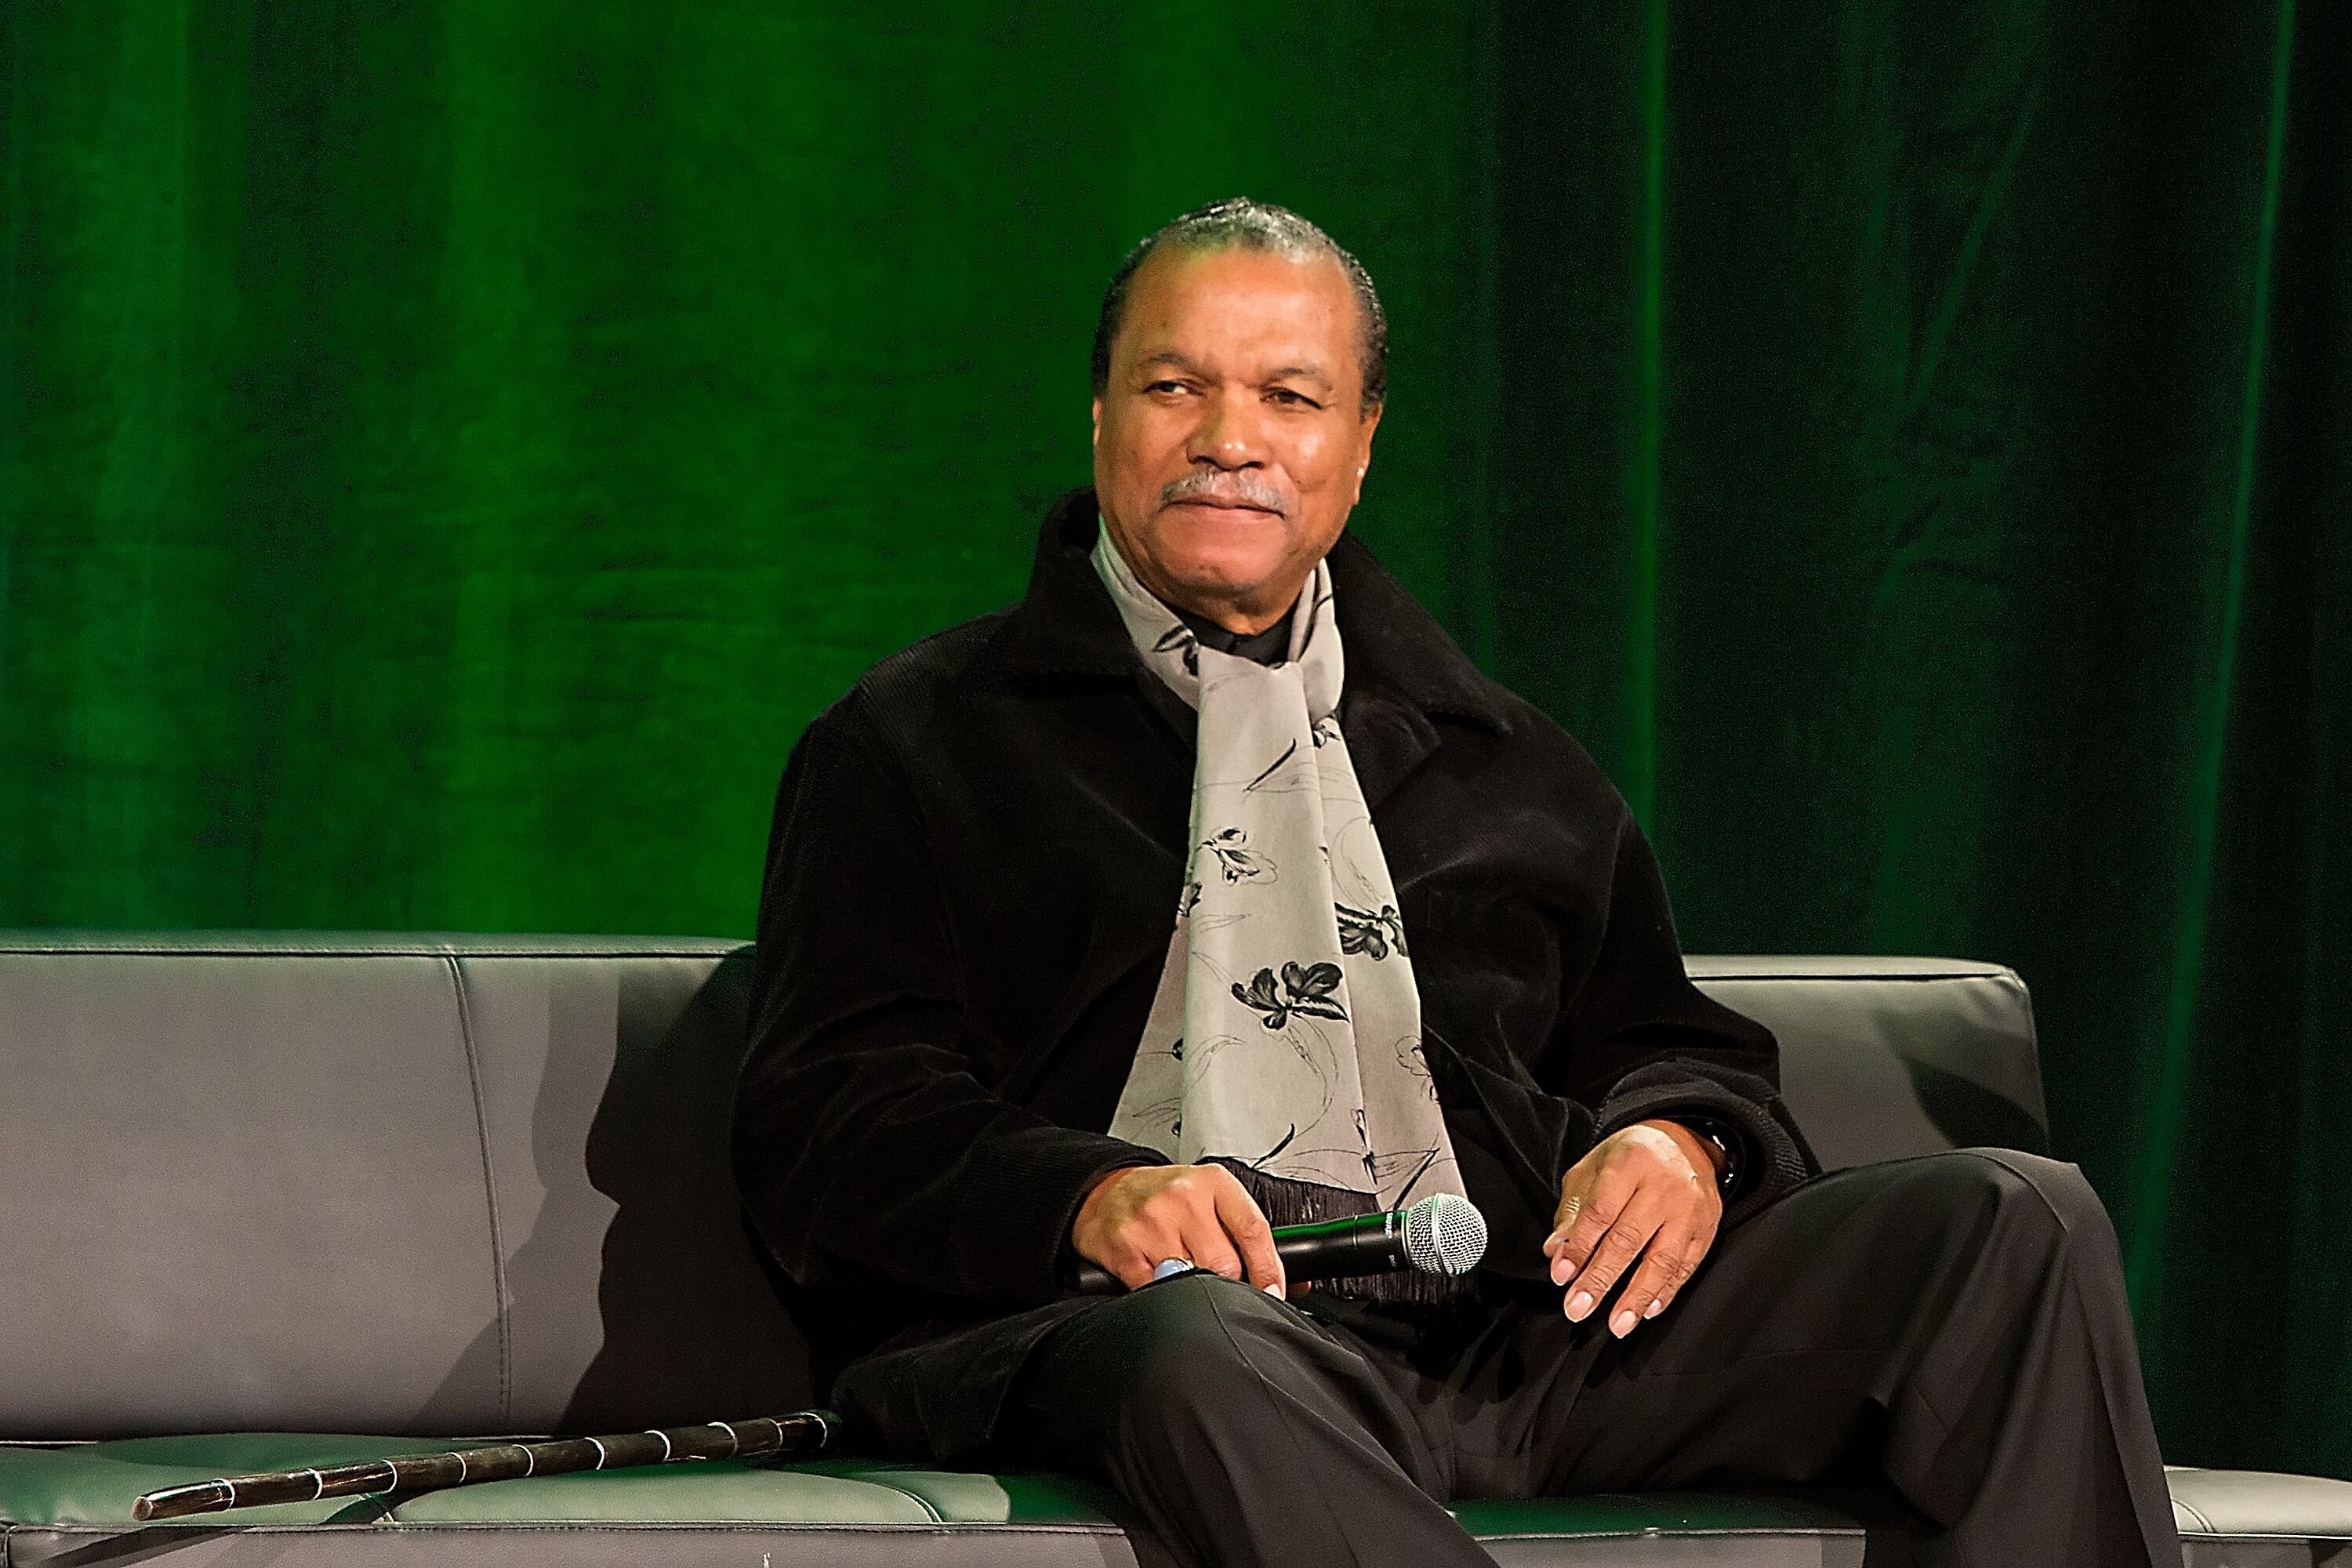 Billy Dee Williams at a speaking engagement | Source: Getty Images/GlobalImagesUkraine